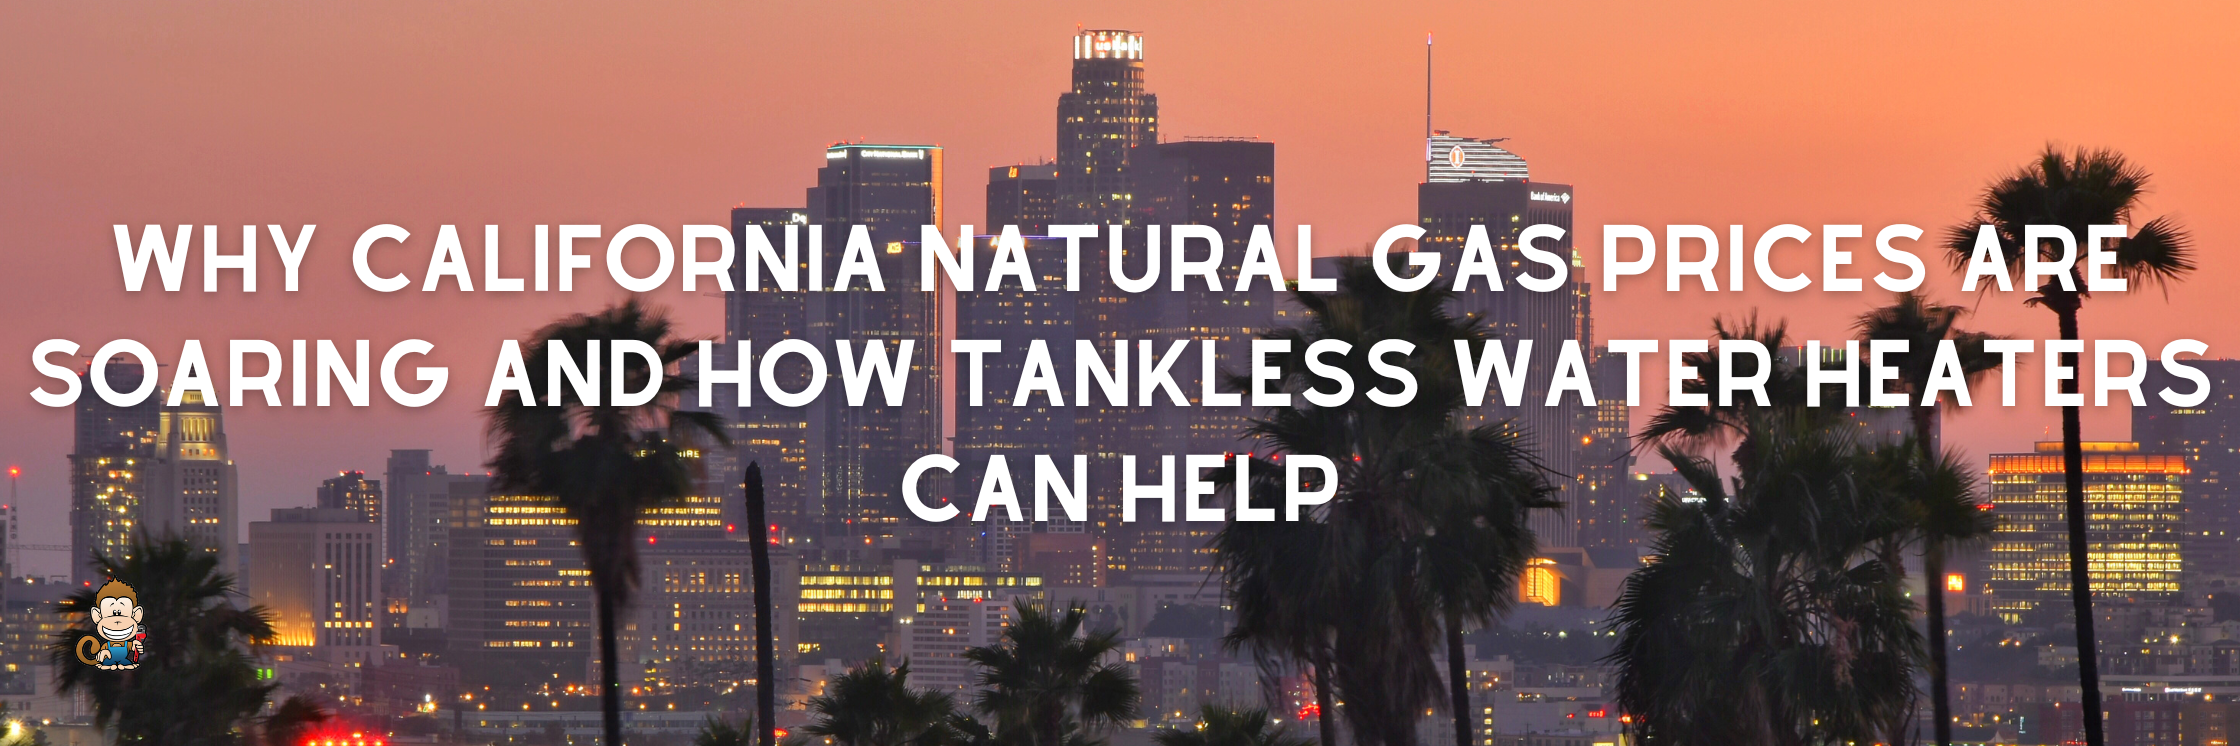 Why California Natural Gas Prices Are Soaring and How Tankless Water Heaters Can Help